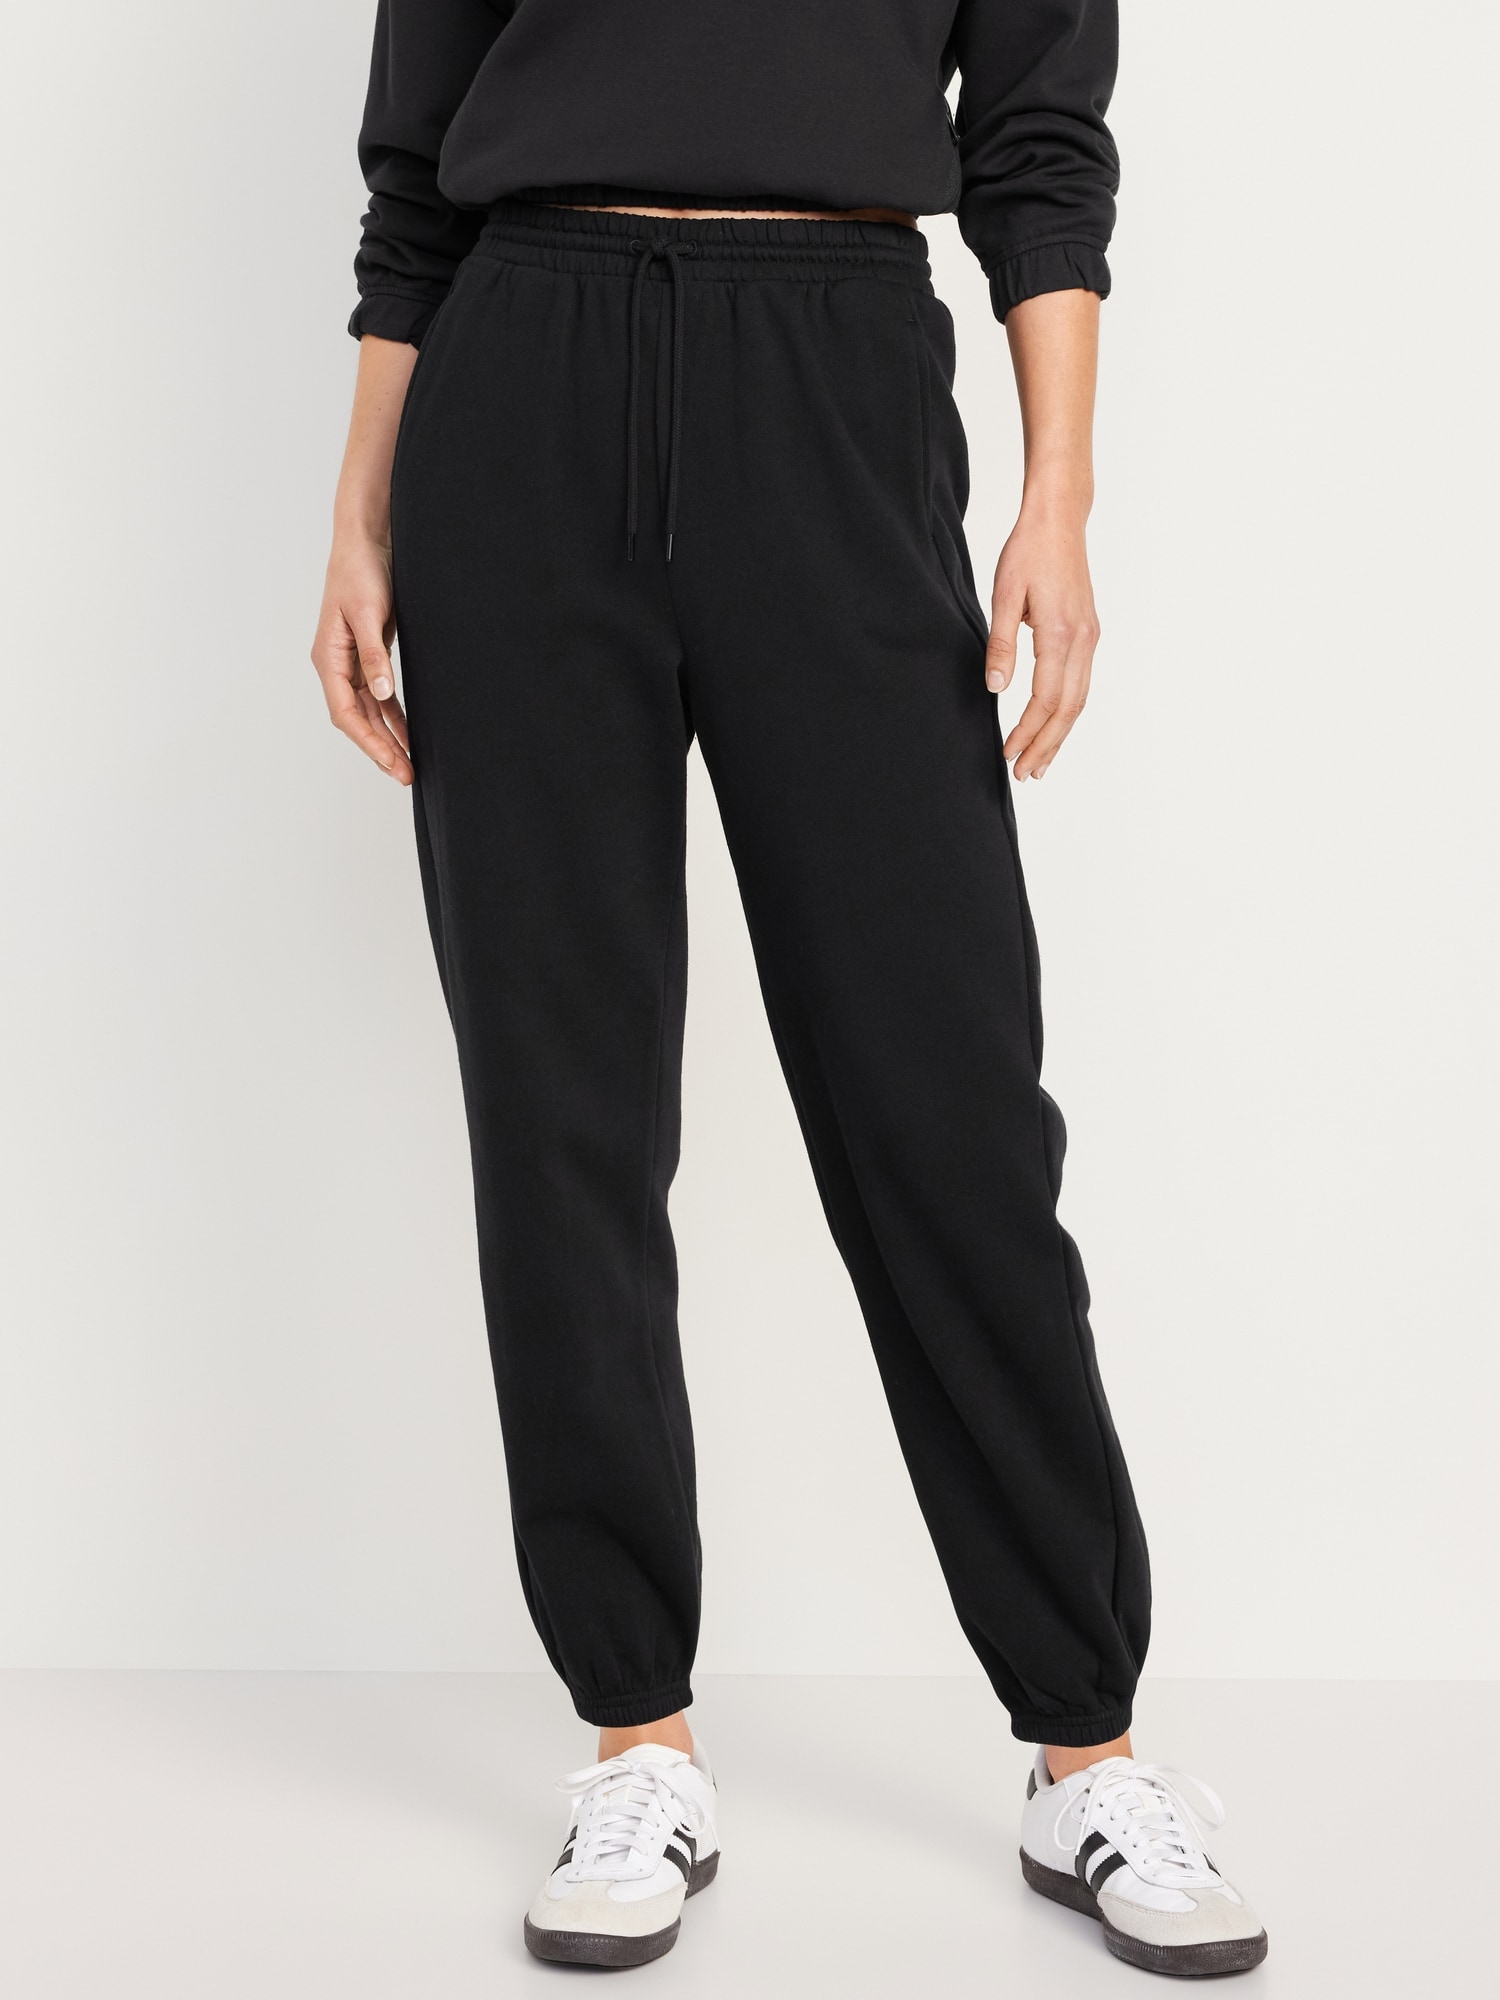  QGGQDD Joggers for Women - Sweatpants with Pockets